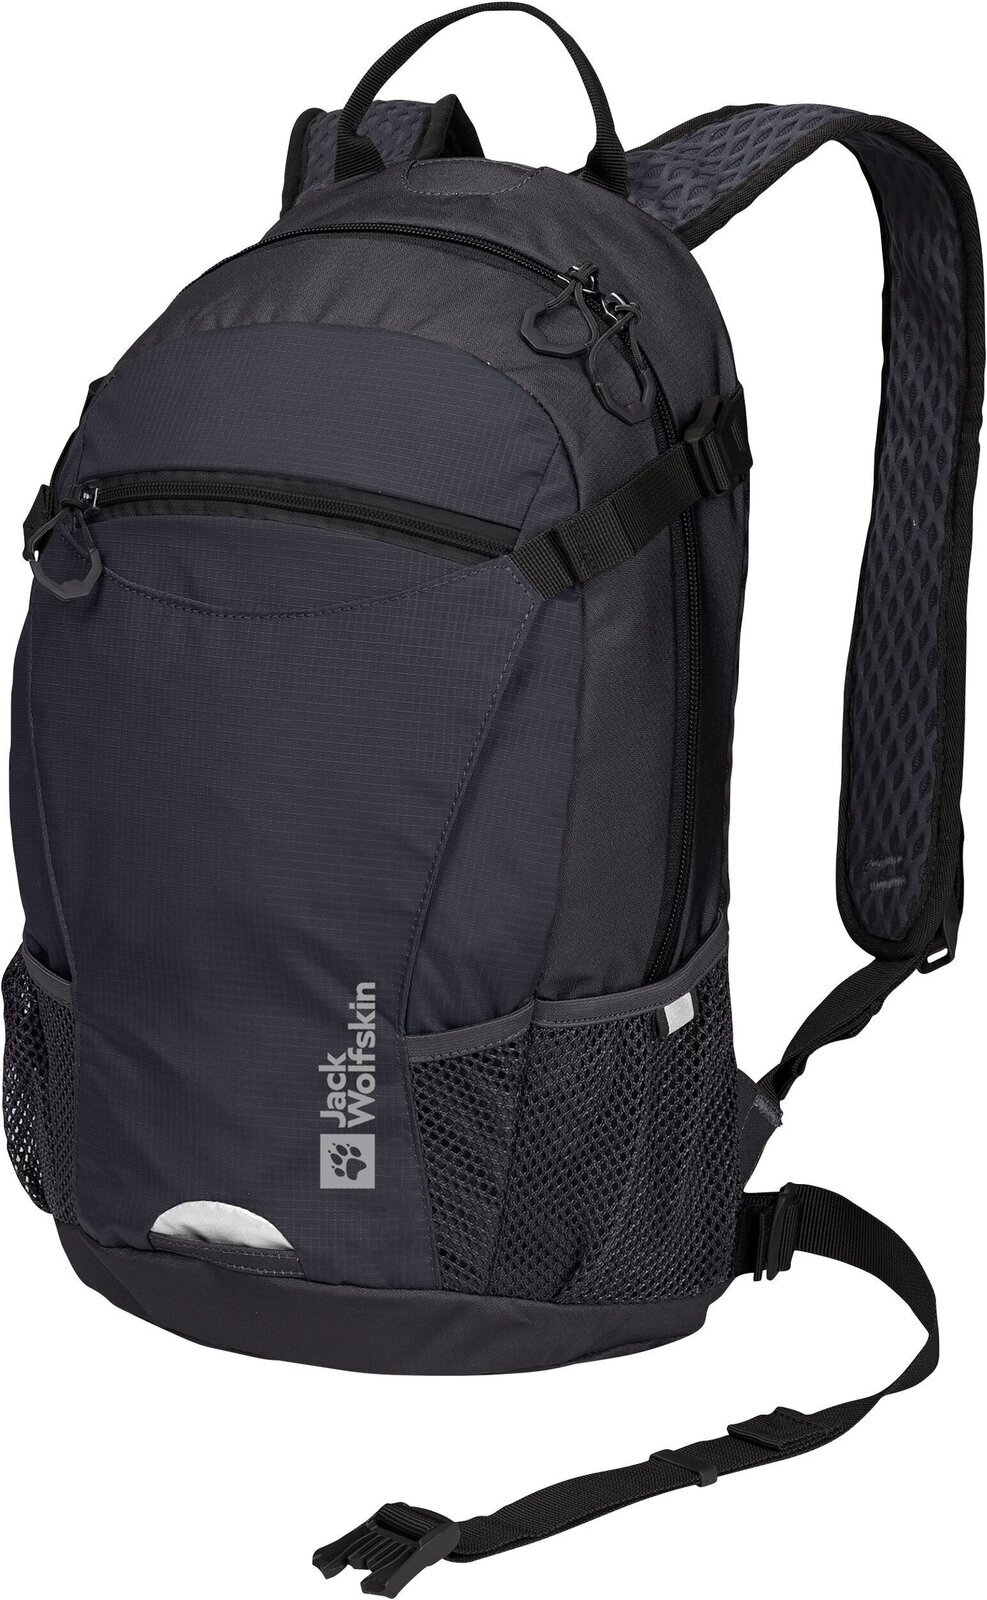 Cycling backpack and accessories Jack Wolfskin Velocity 12 Phantom Backpack